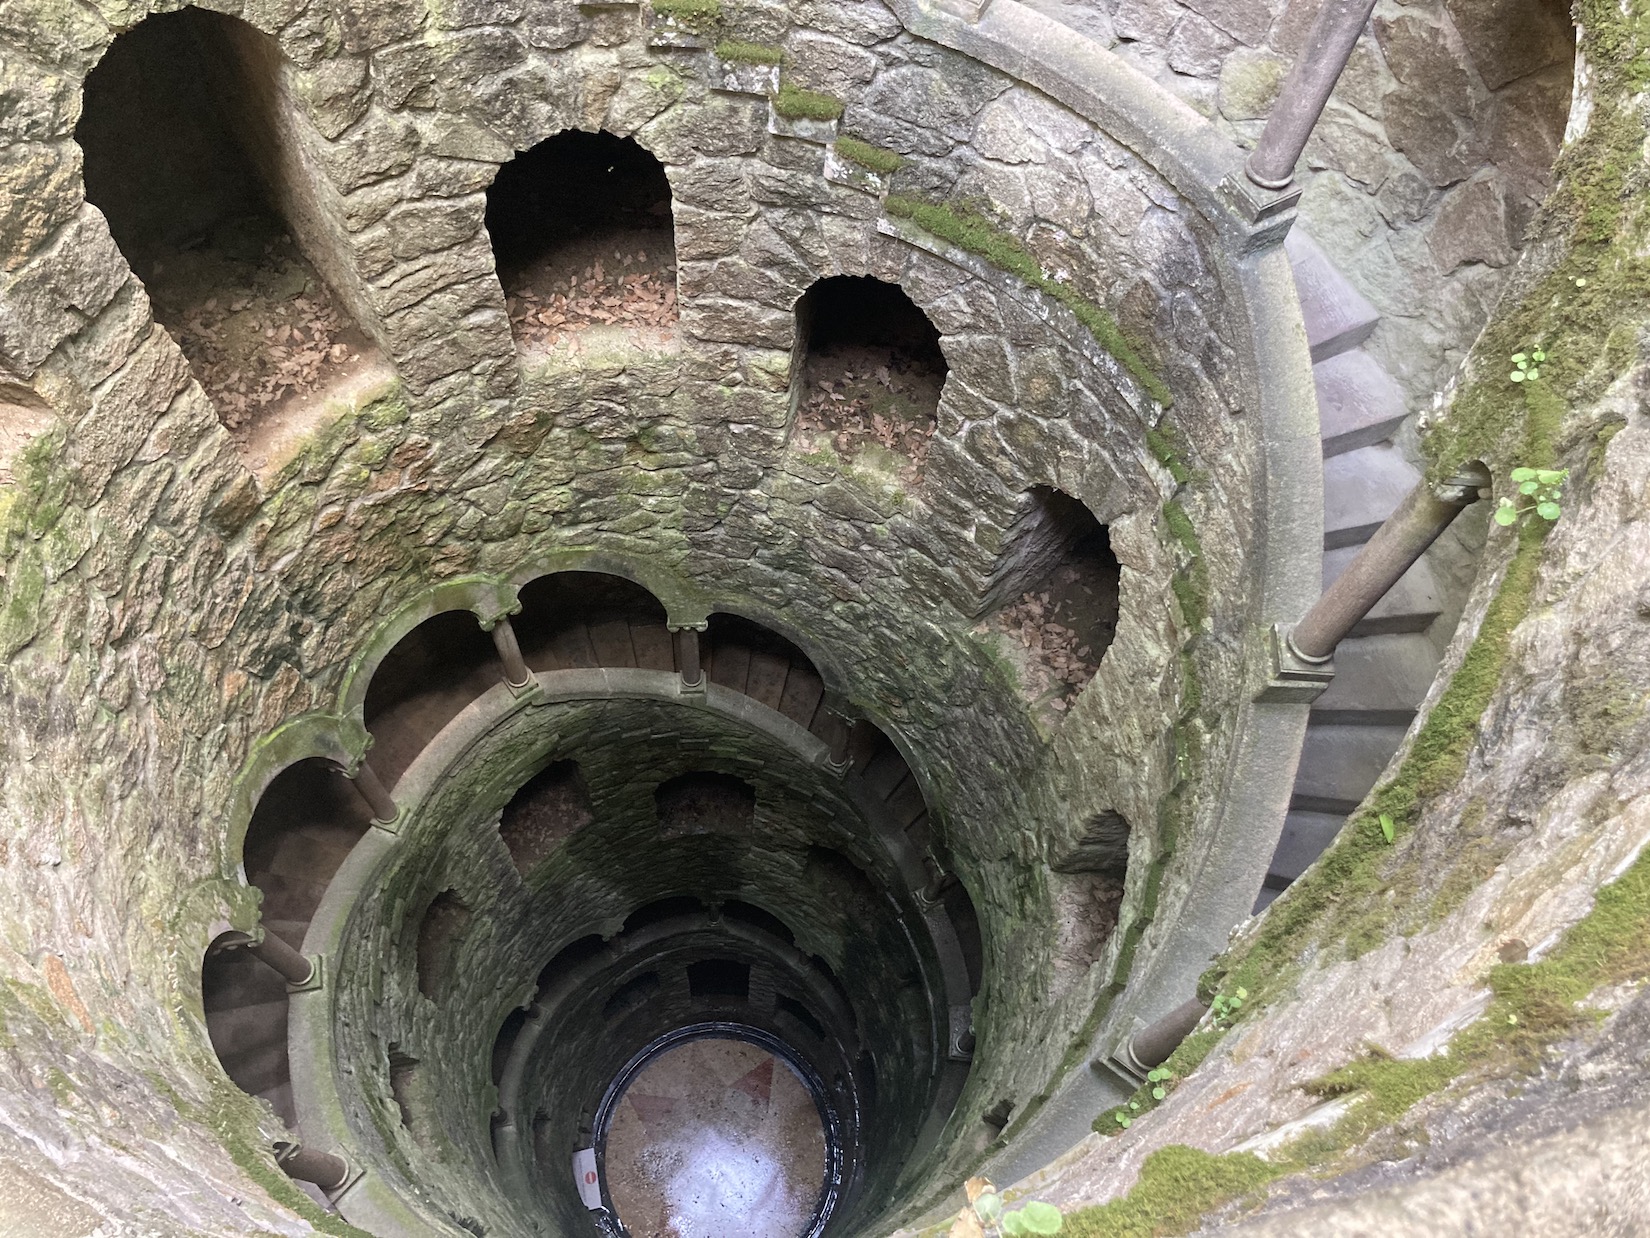 initiation well